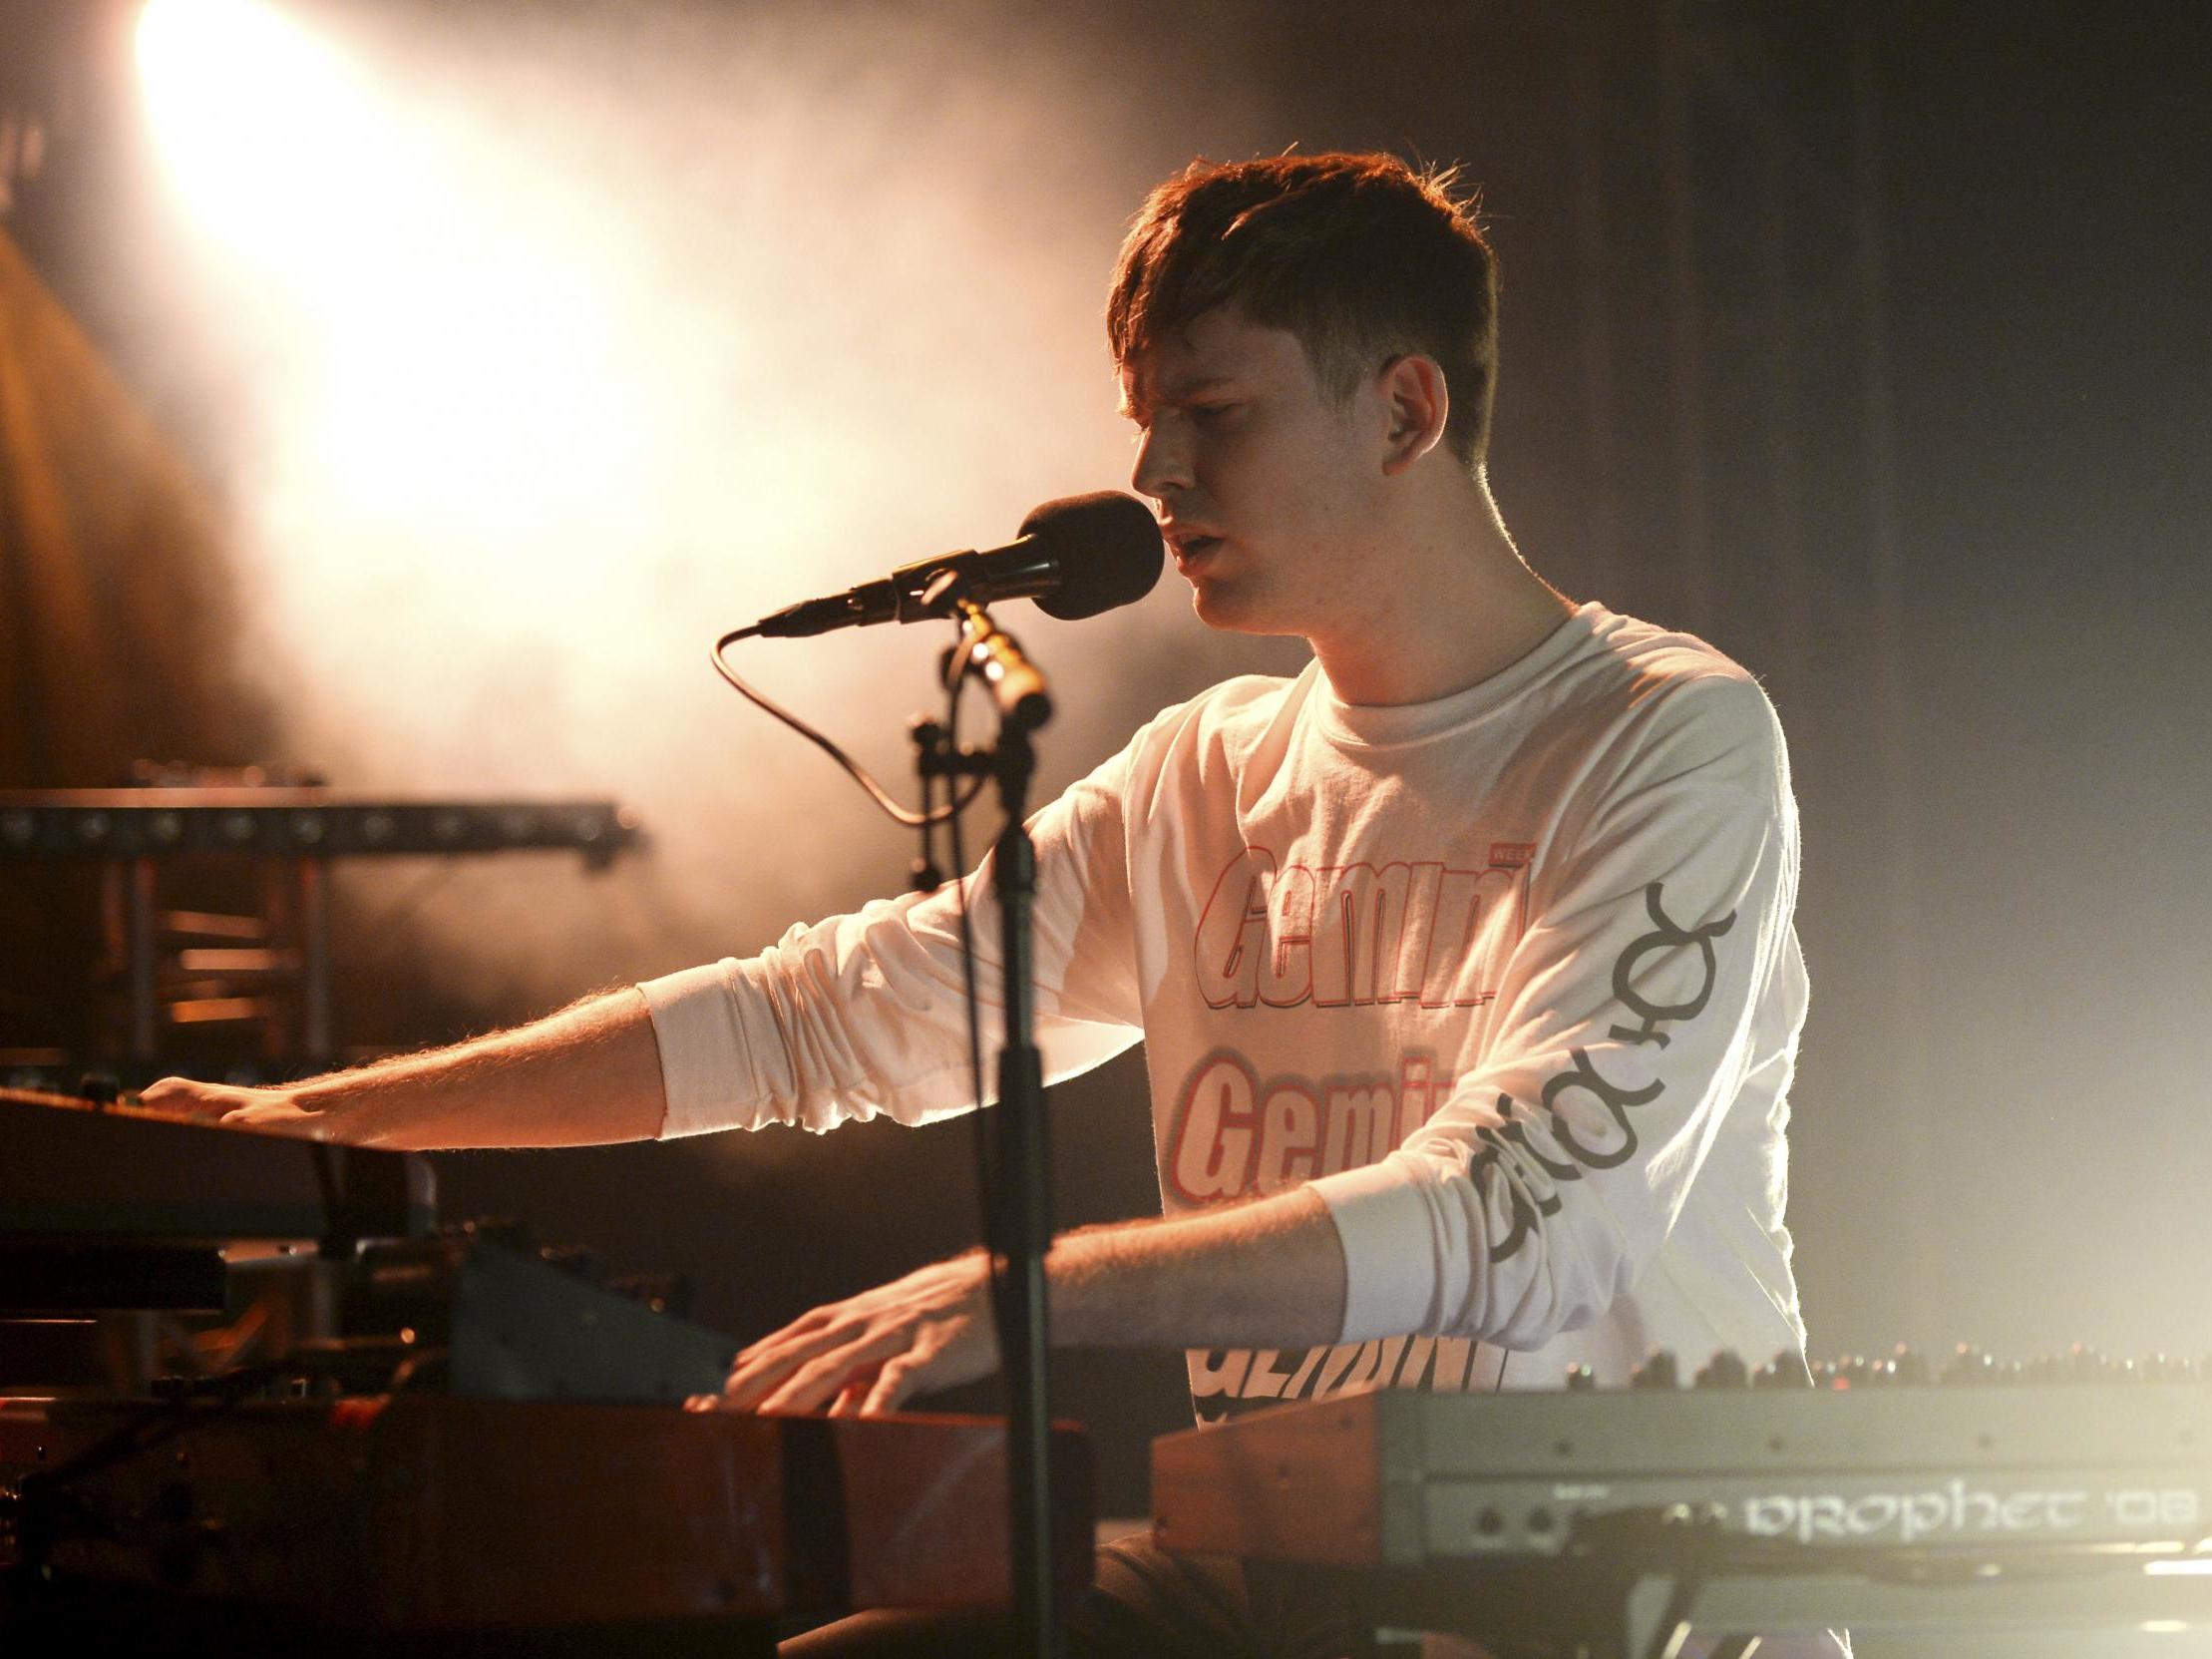 James Blake’s decor may be going minimalist, but he’s continuing with musical maximalism for his new record